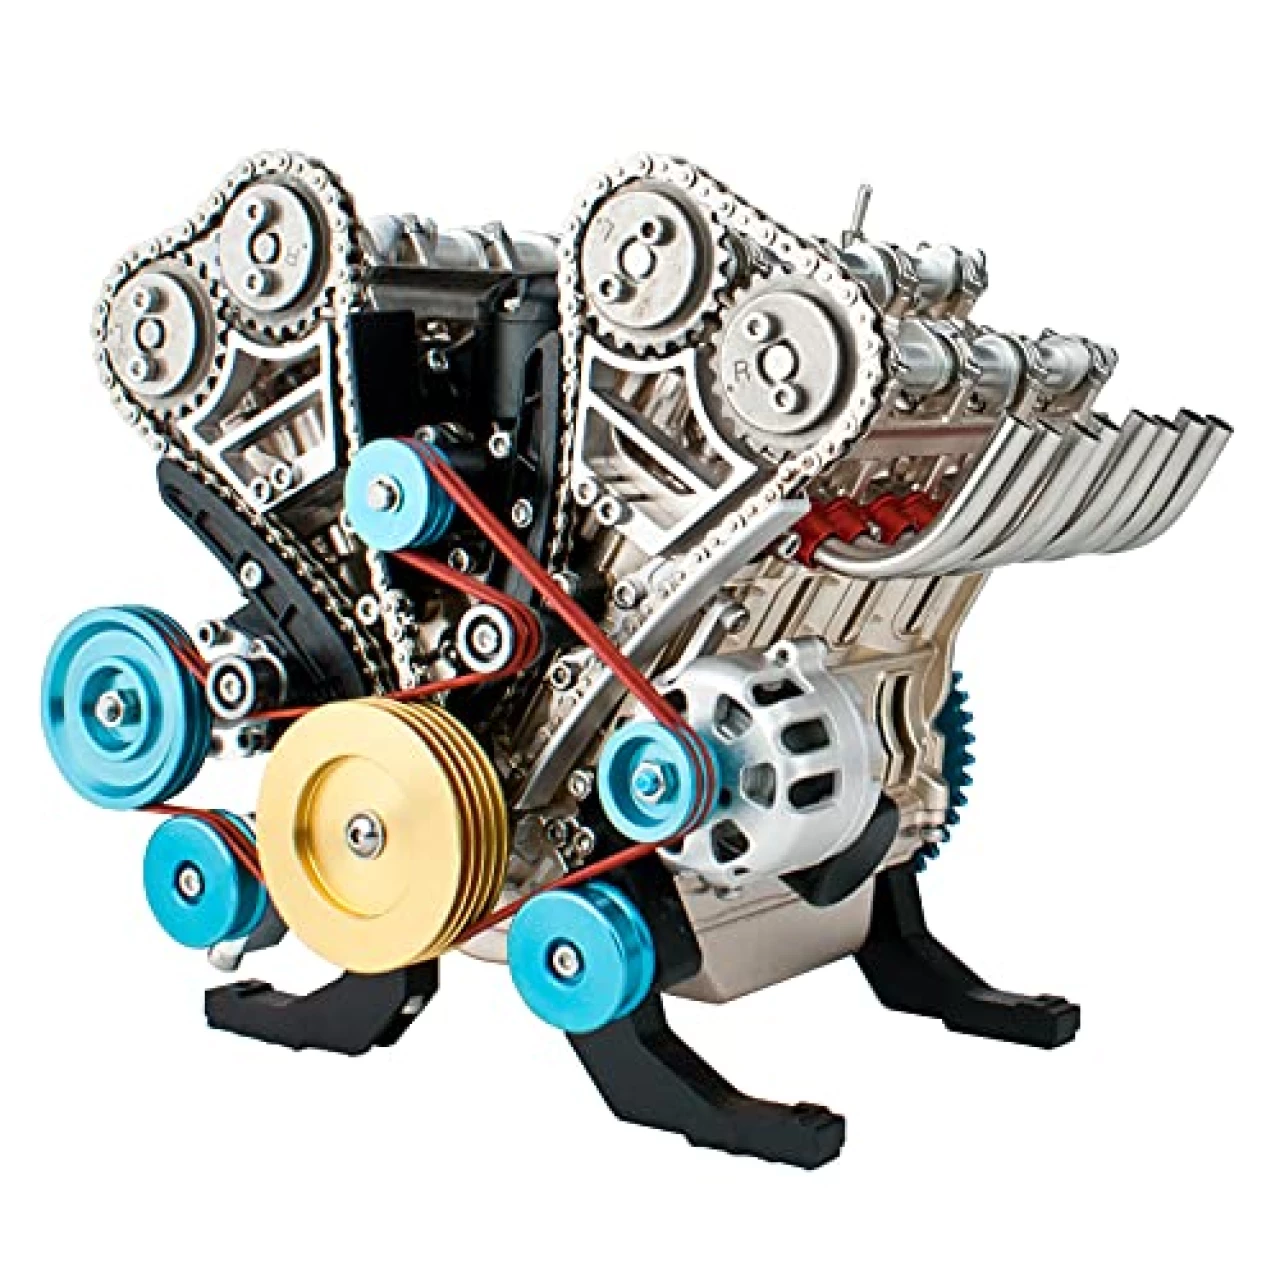 DjuiinoStar Vehicle Engine Model Assembly Kit (350+ Pieces Components, 3 Hours Assembly Time)